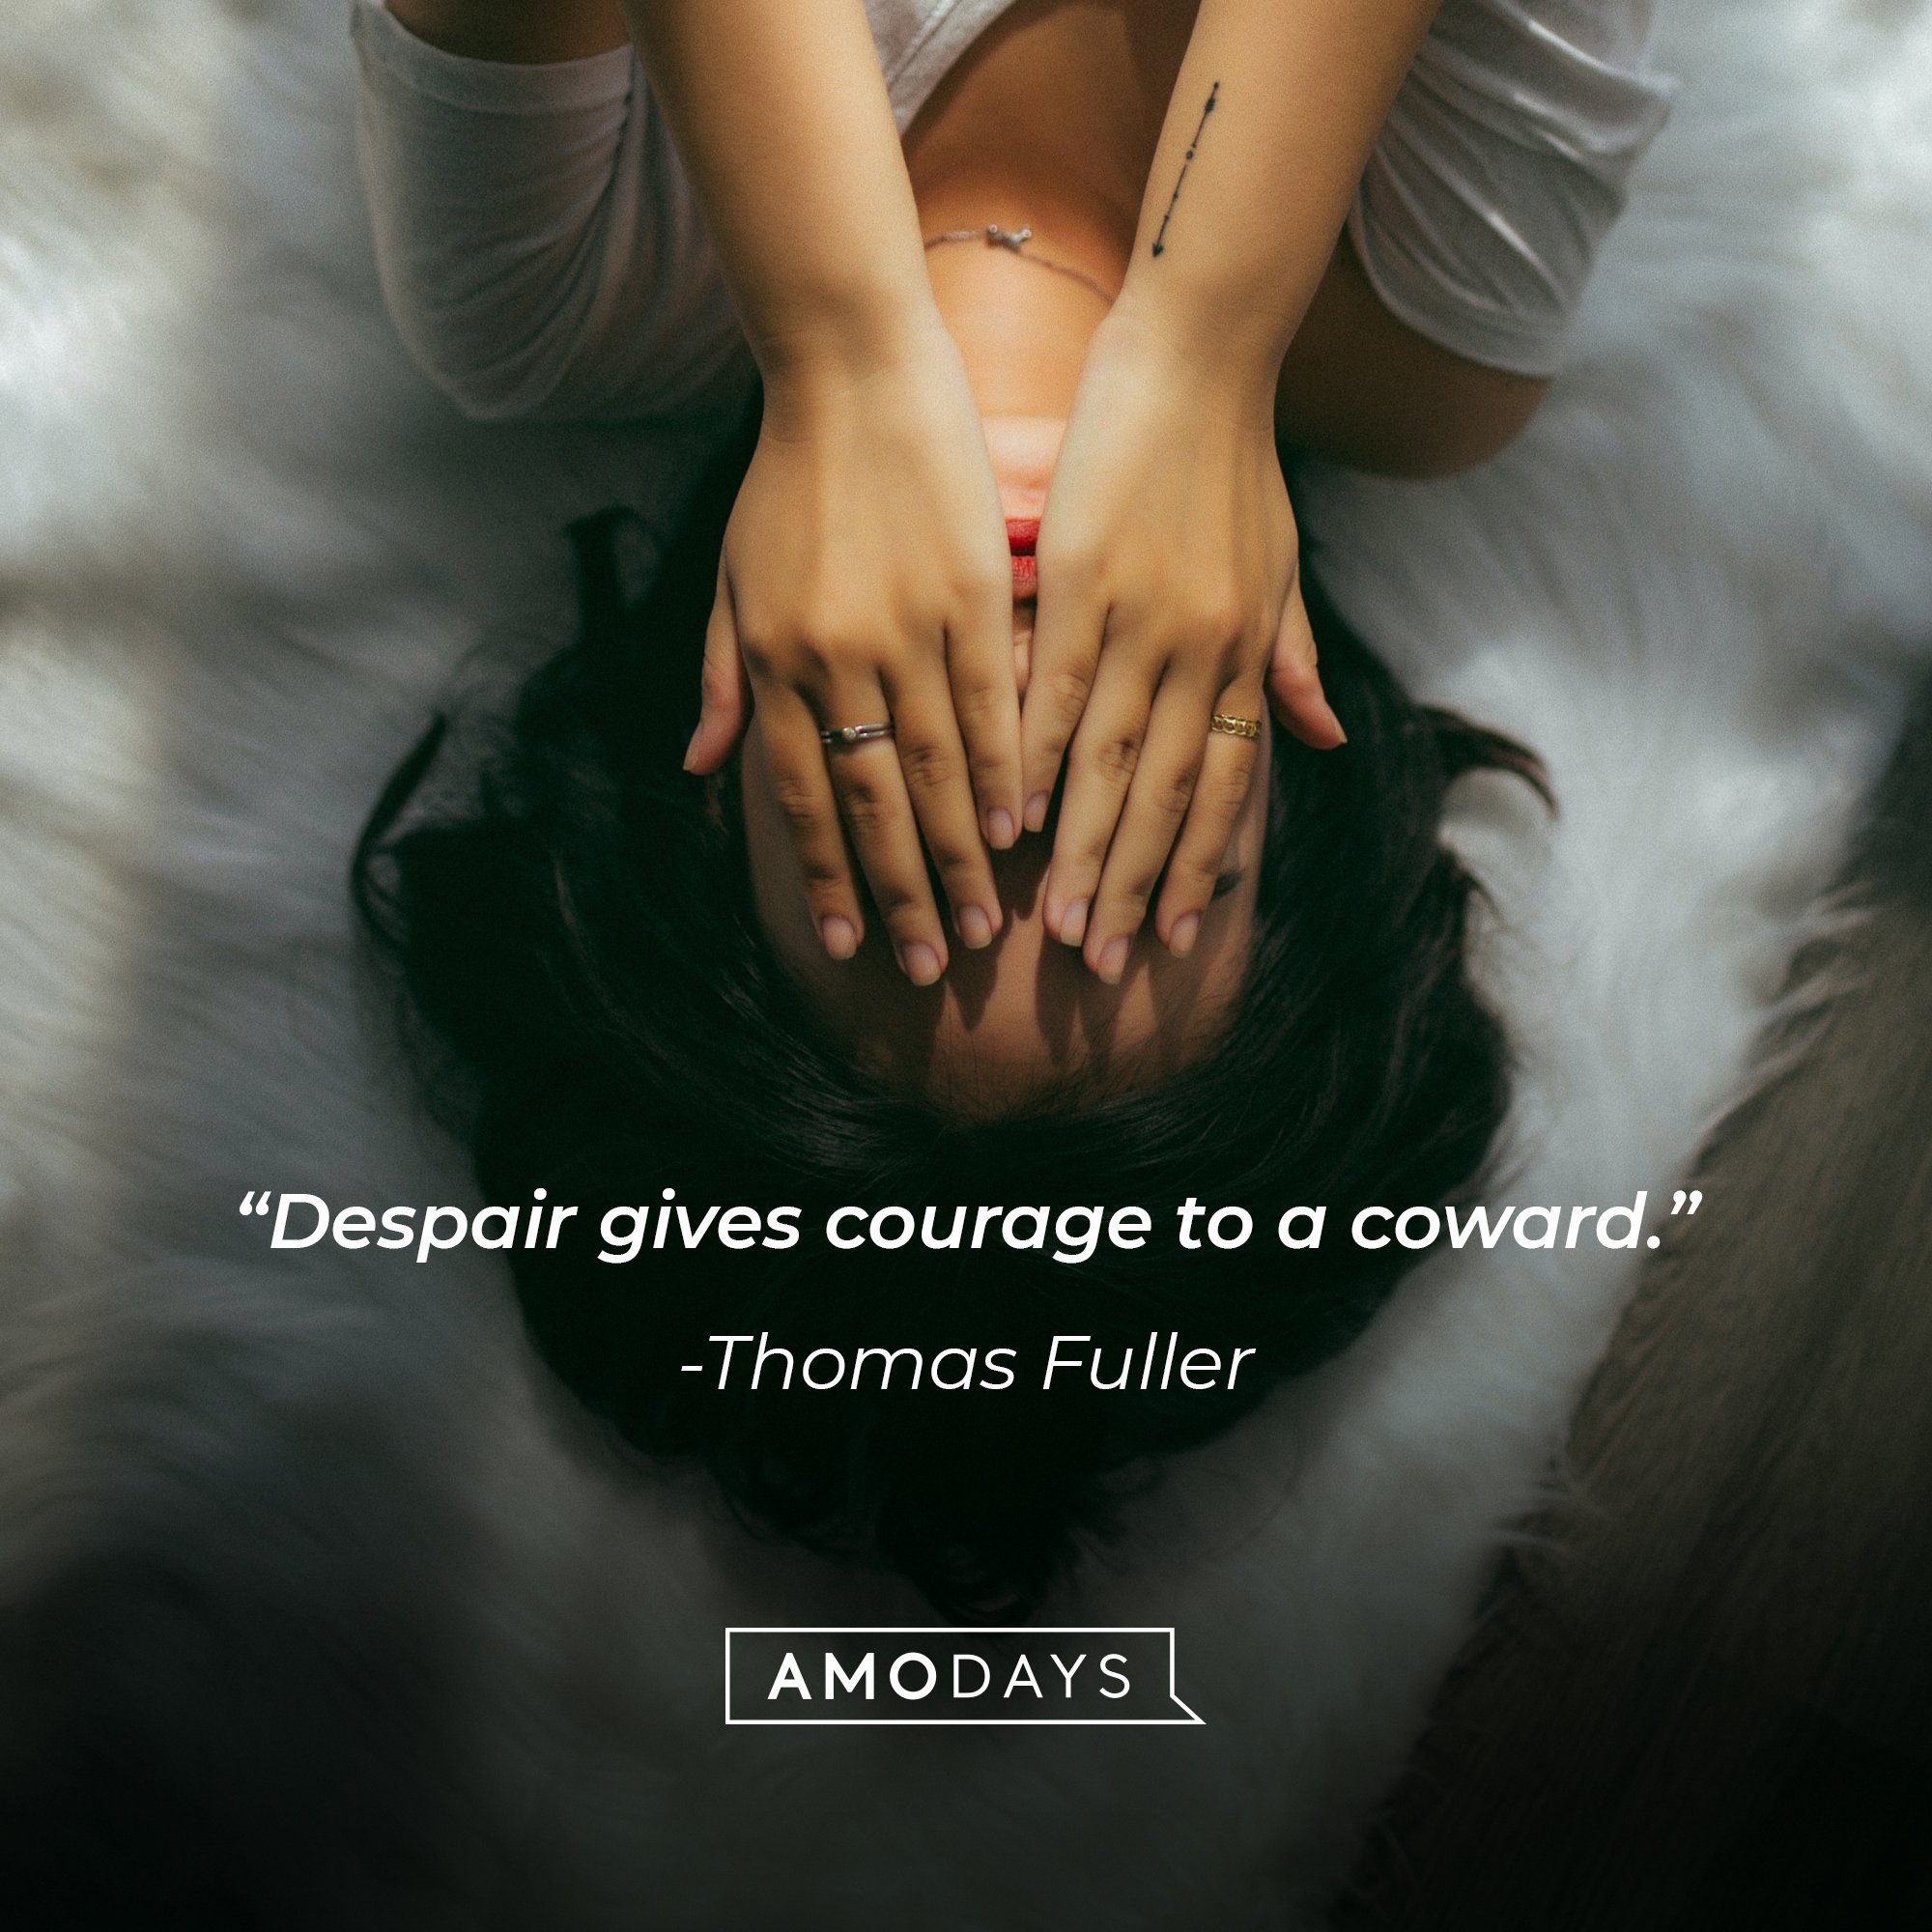 Thomas Fuller’s quote: "Despair gives courage to a coward." | Image: AmoDays